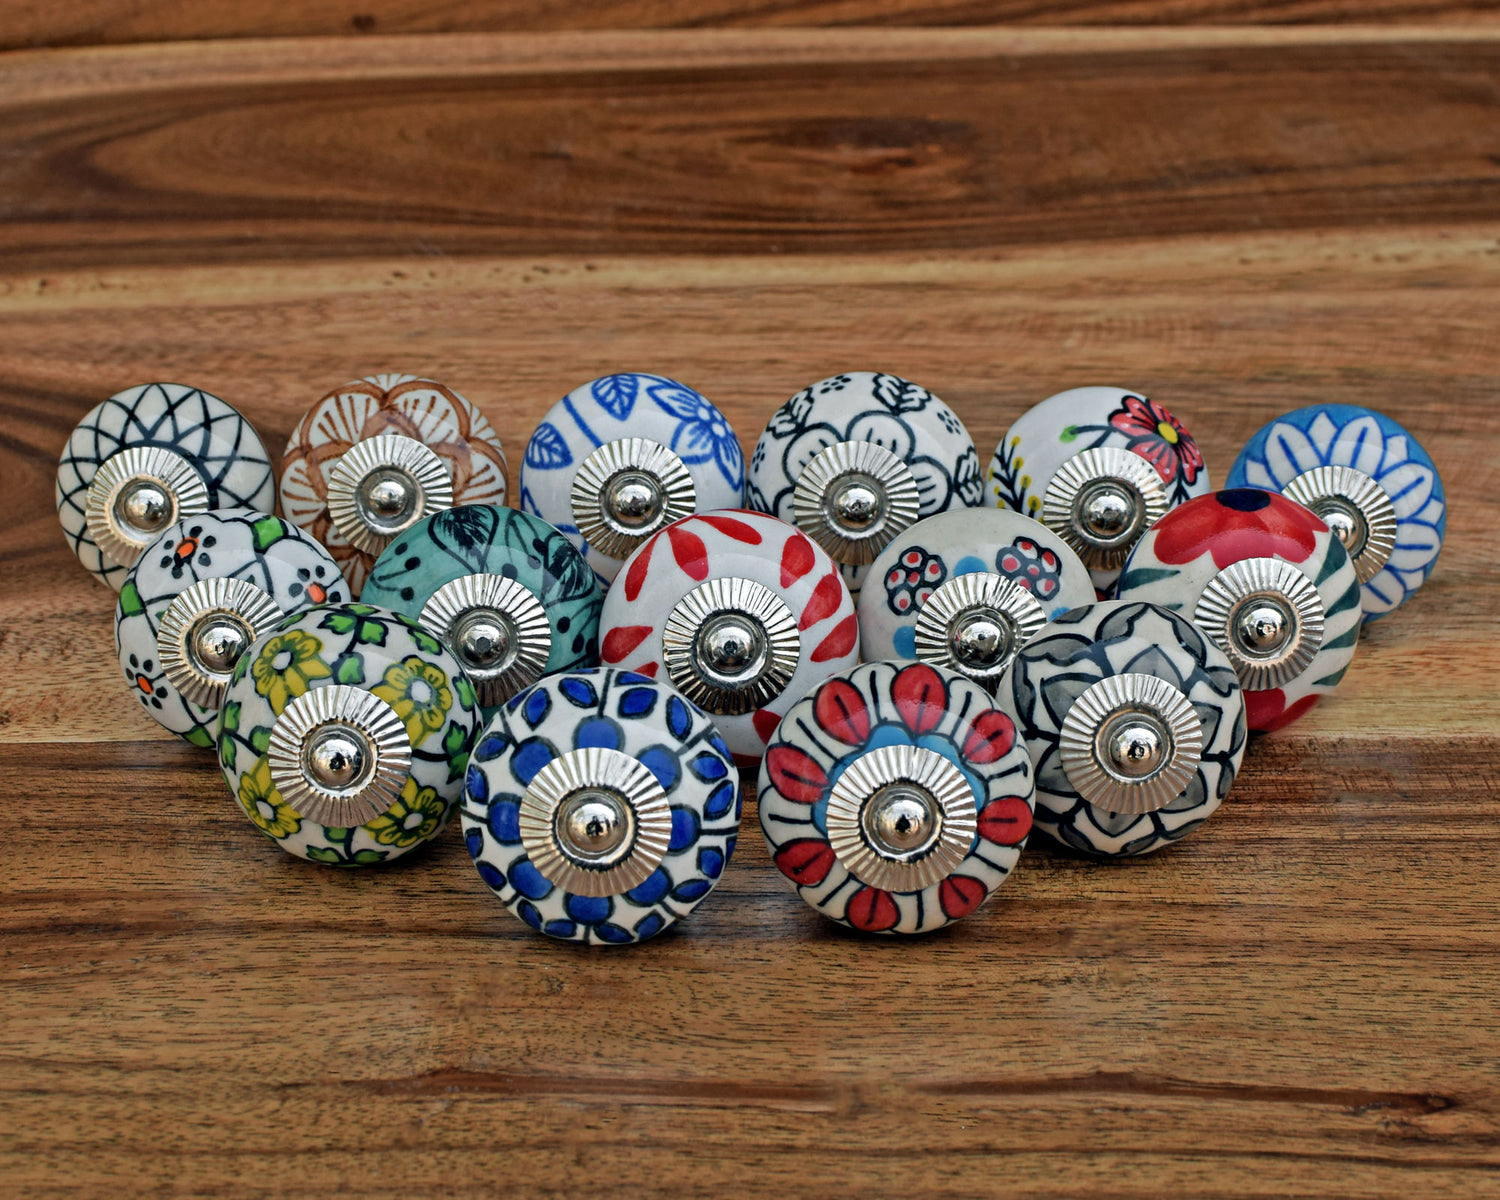 Handmade colorful ceramic knobs for drawers and cabinets